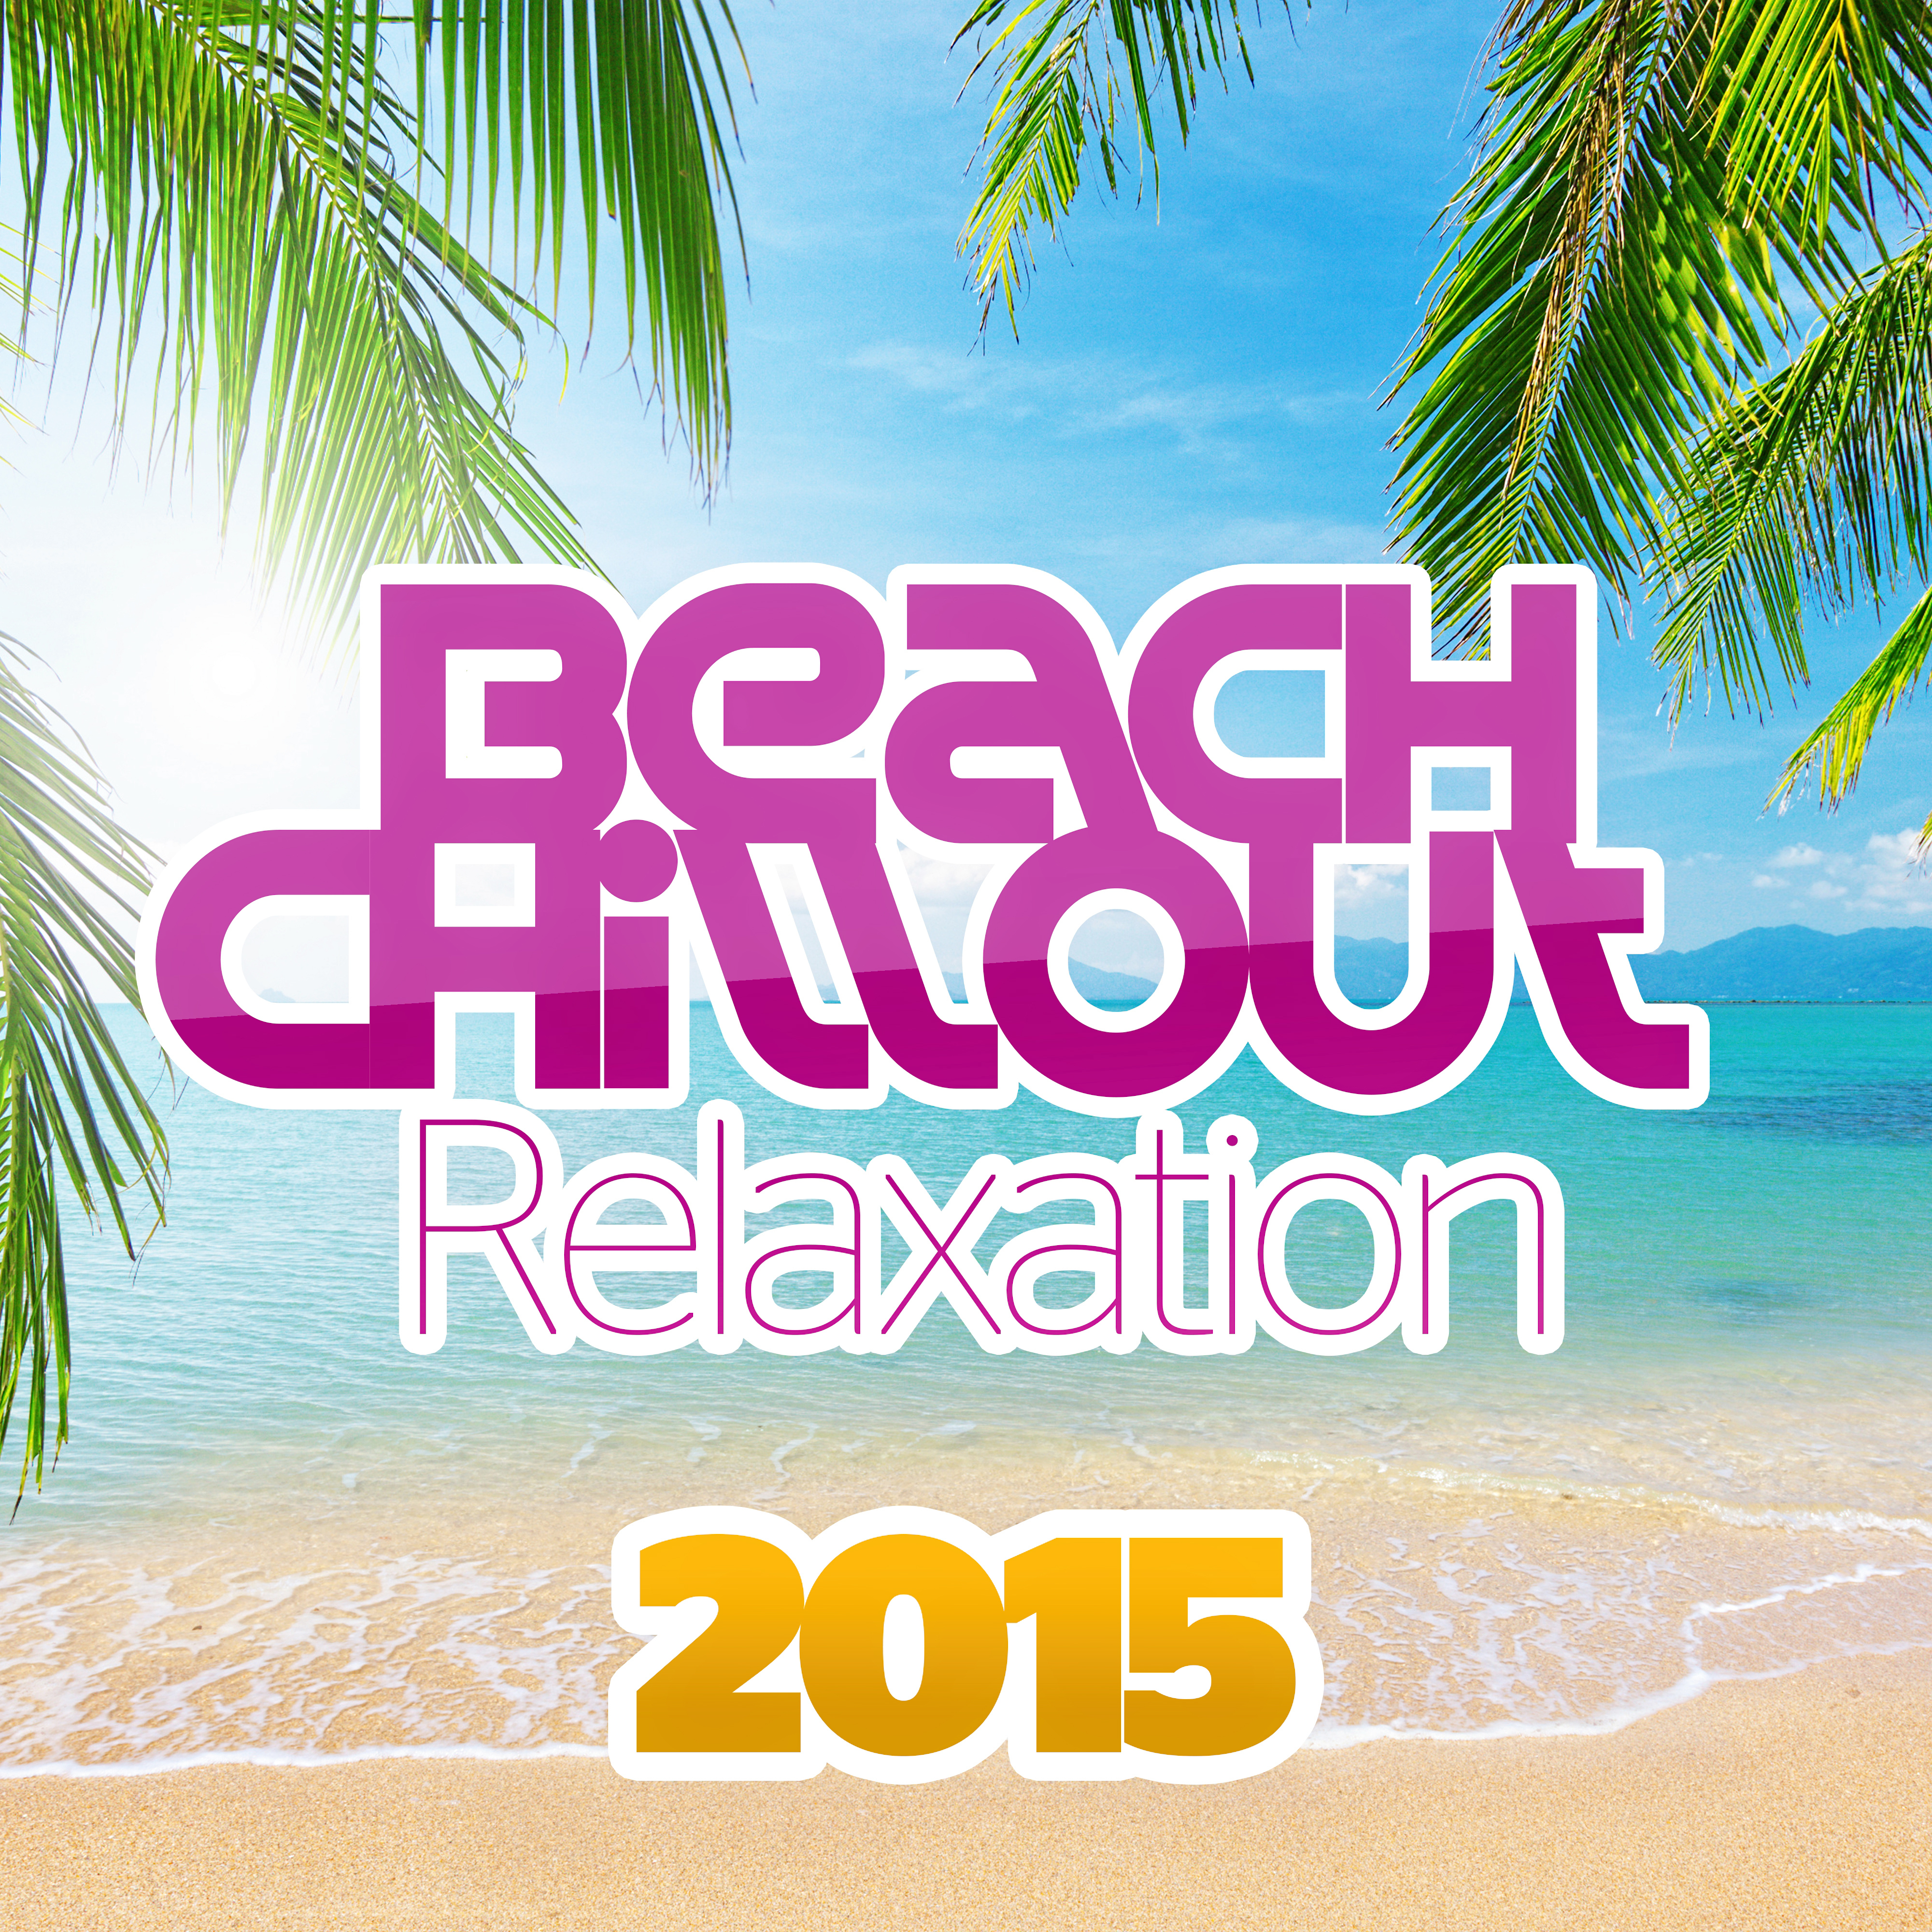 Beach Chillout Relaxation 2015  Summer Party, On the Beach, Relaxation, Beach Walk, Chill Out, Beauty View, Break